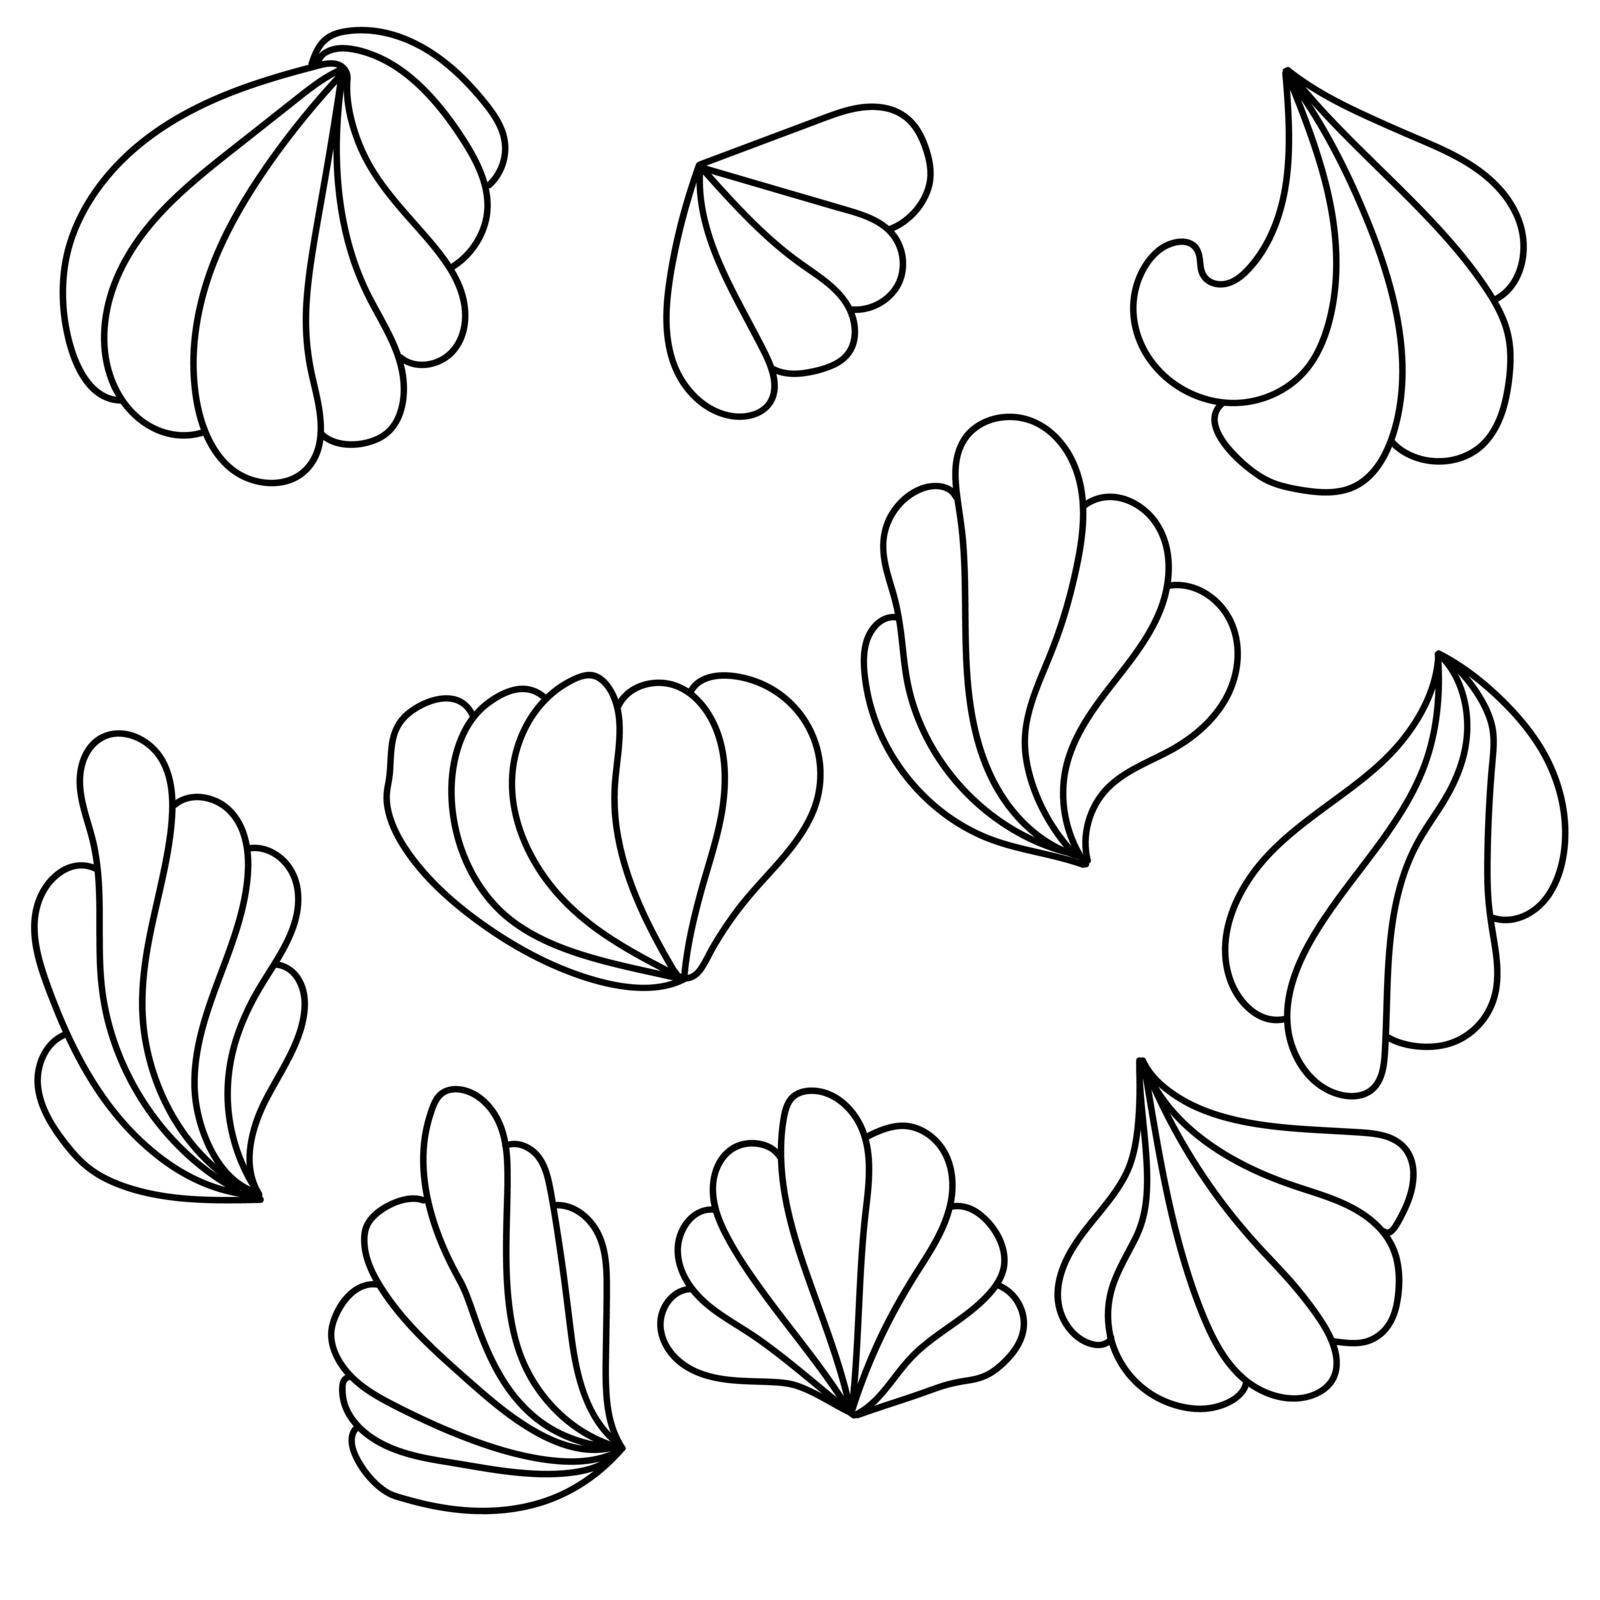 Vector illustration doodle shell-like elements for design and creativity